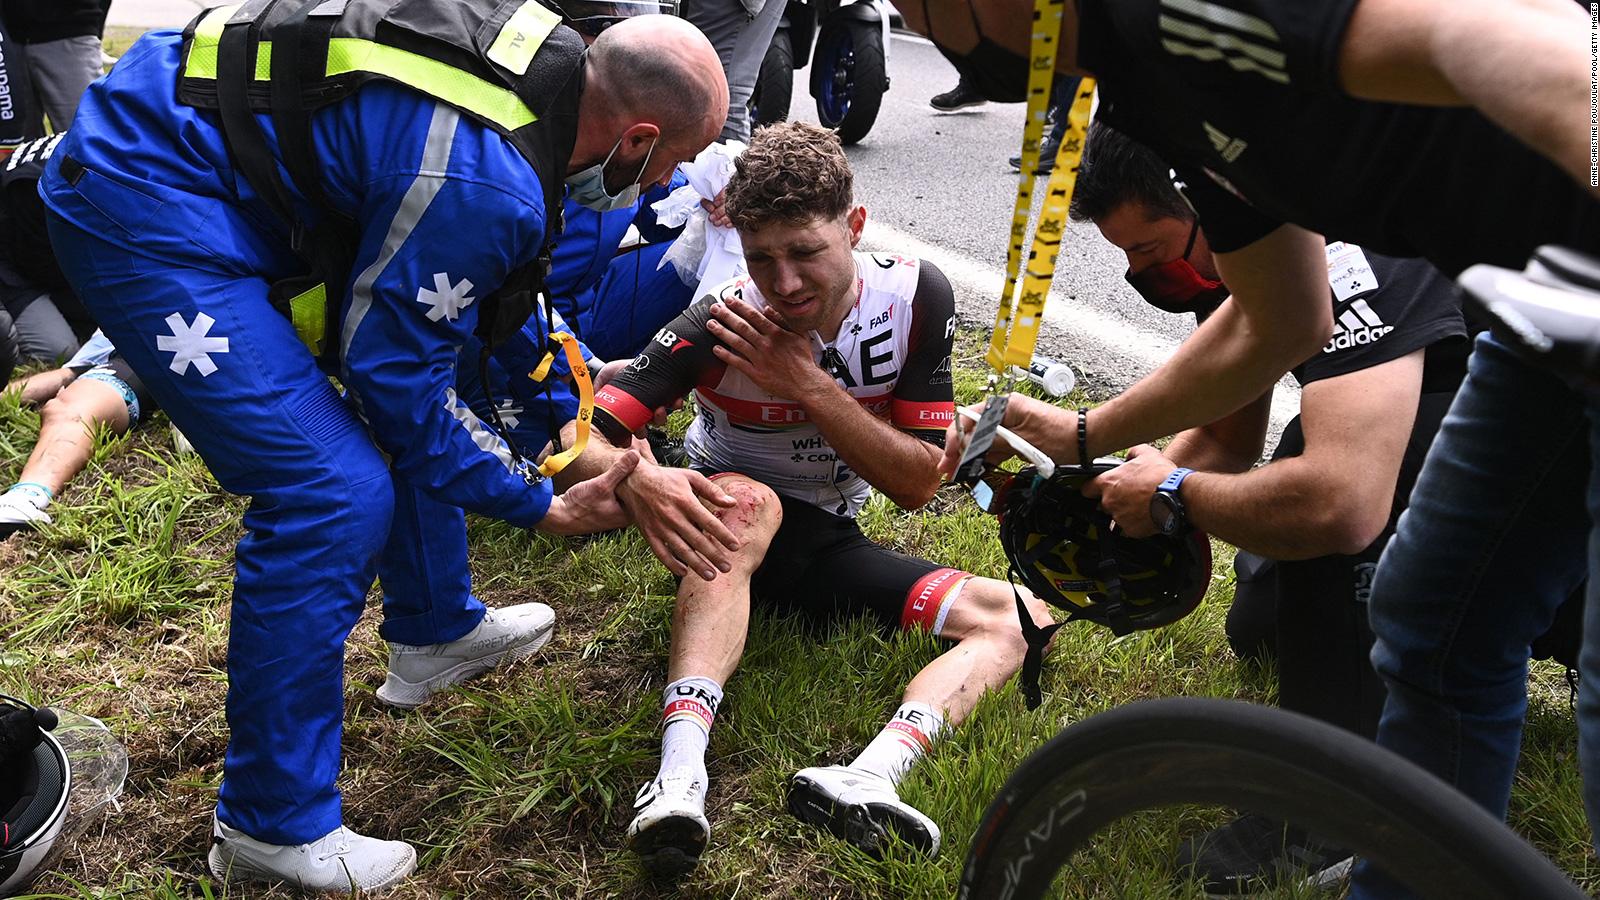 Daniel Oss Cyclist withdraws from Tour de France after breaking neck